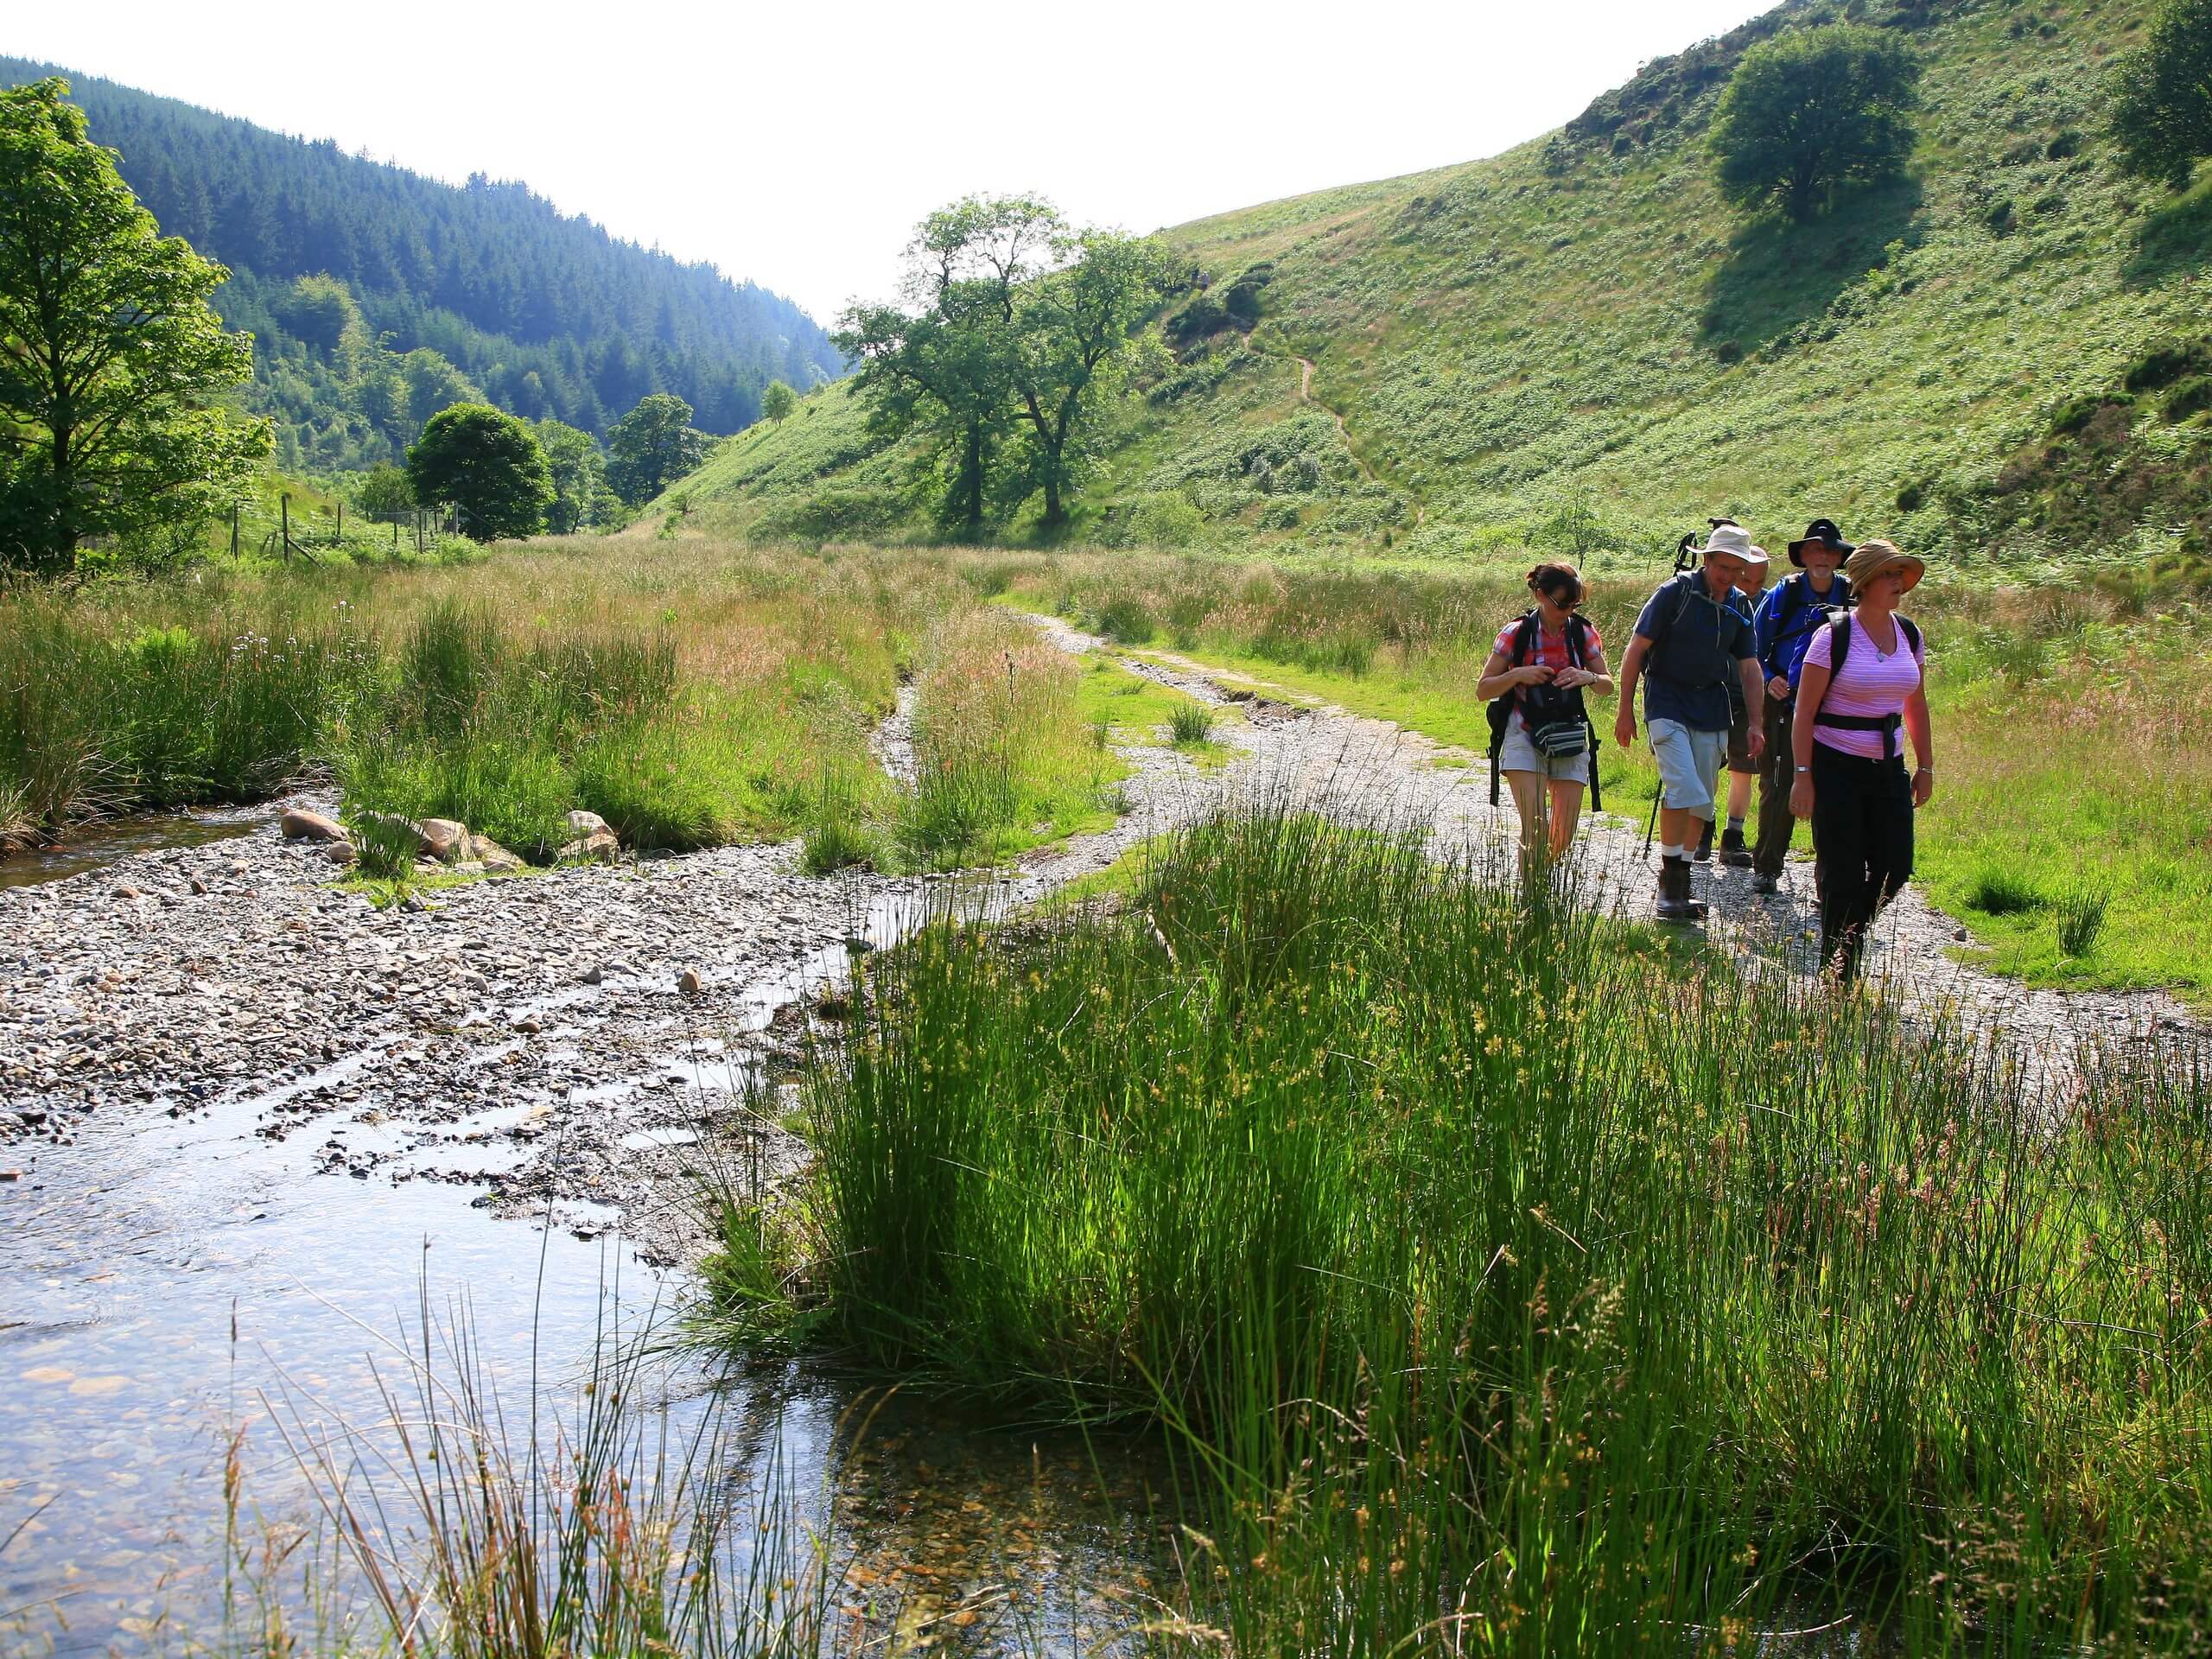 Group of walkers in the Lake District, Cumbria (c)John Millen